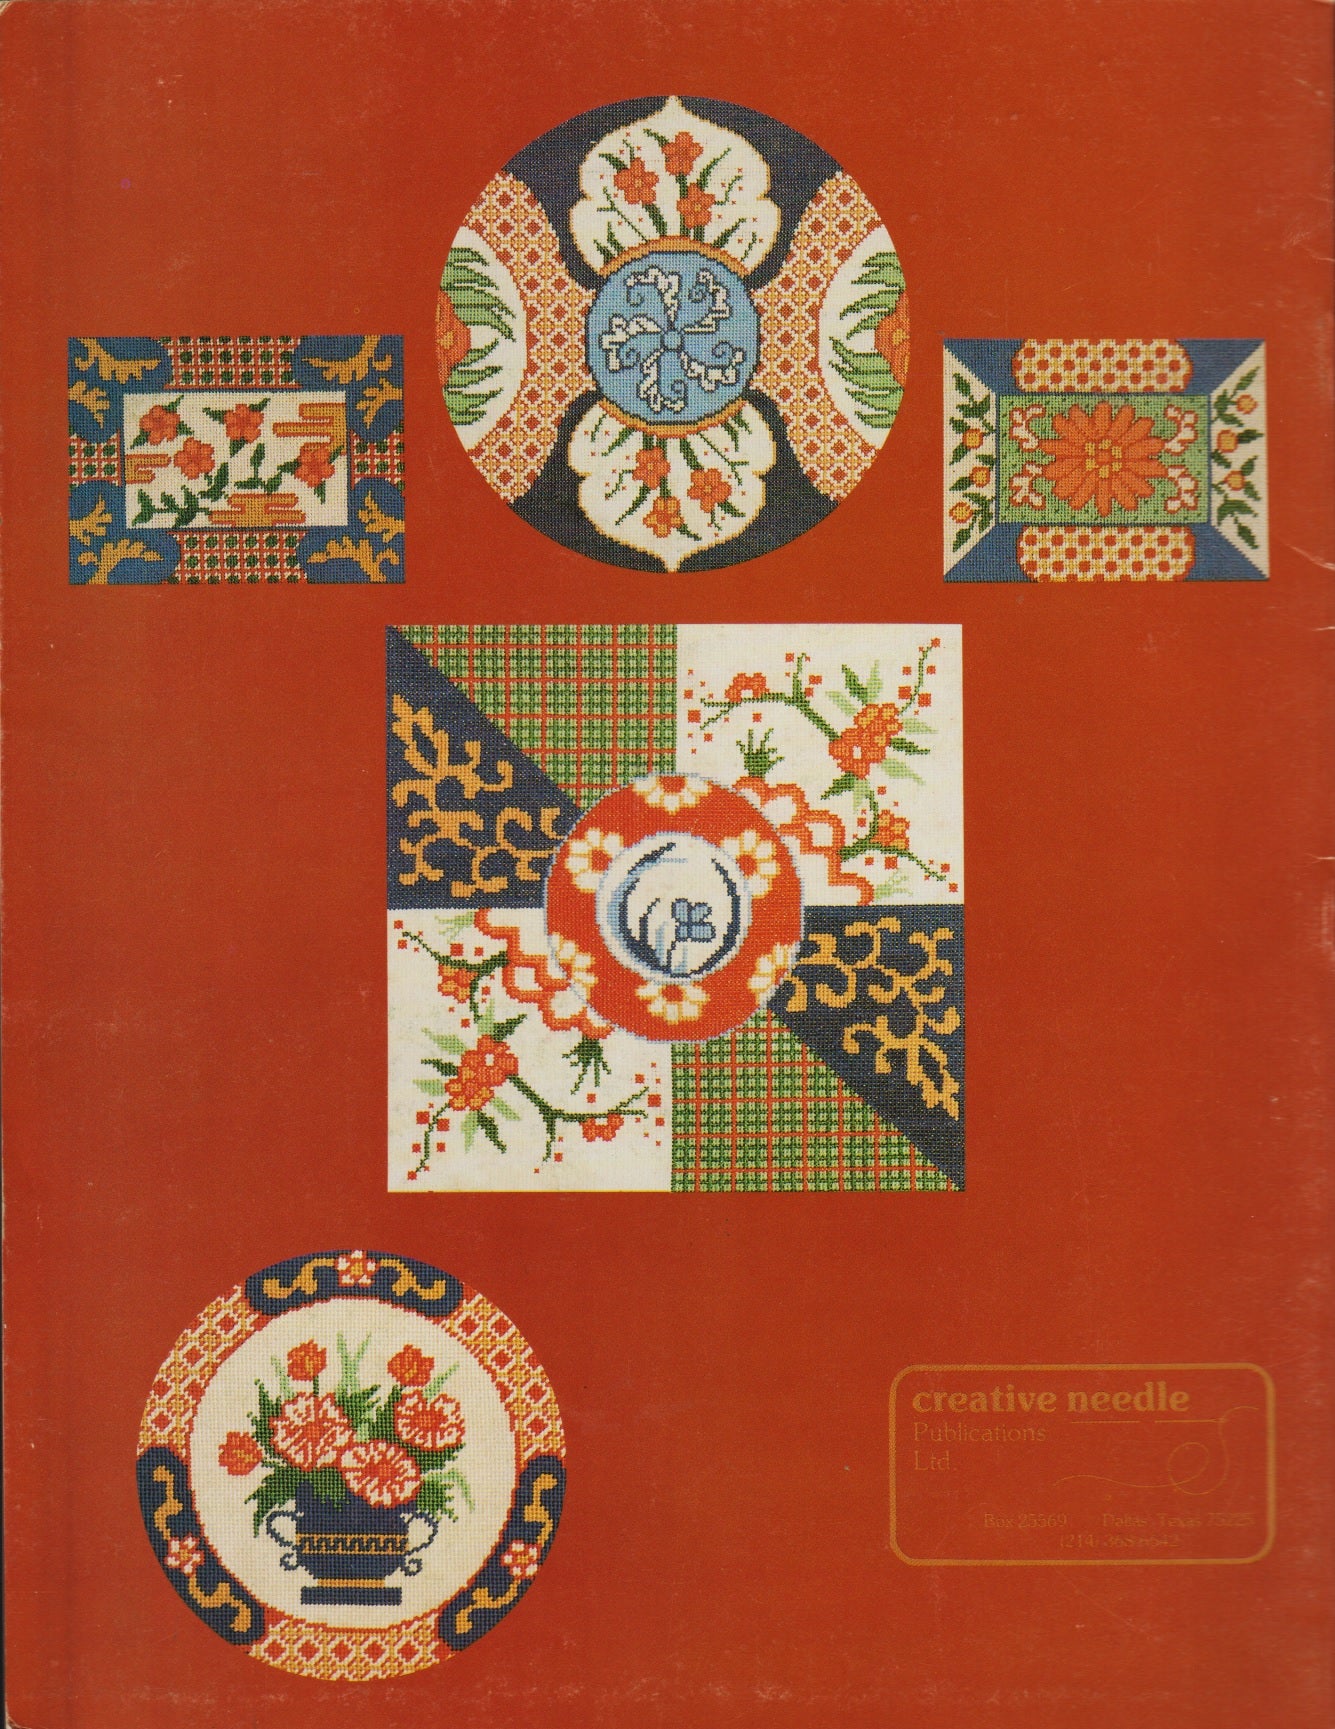 The Imari Collection pattern